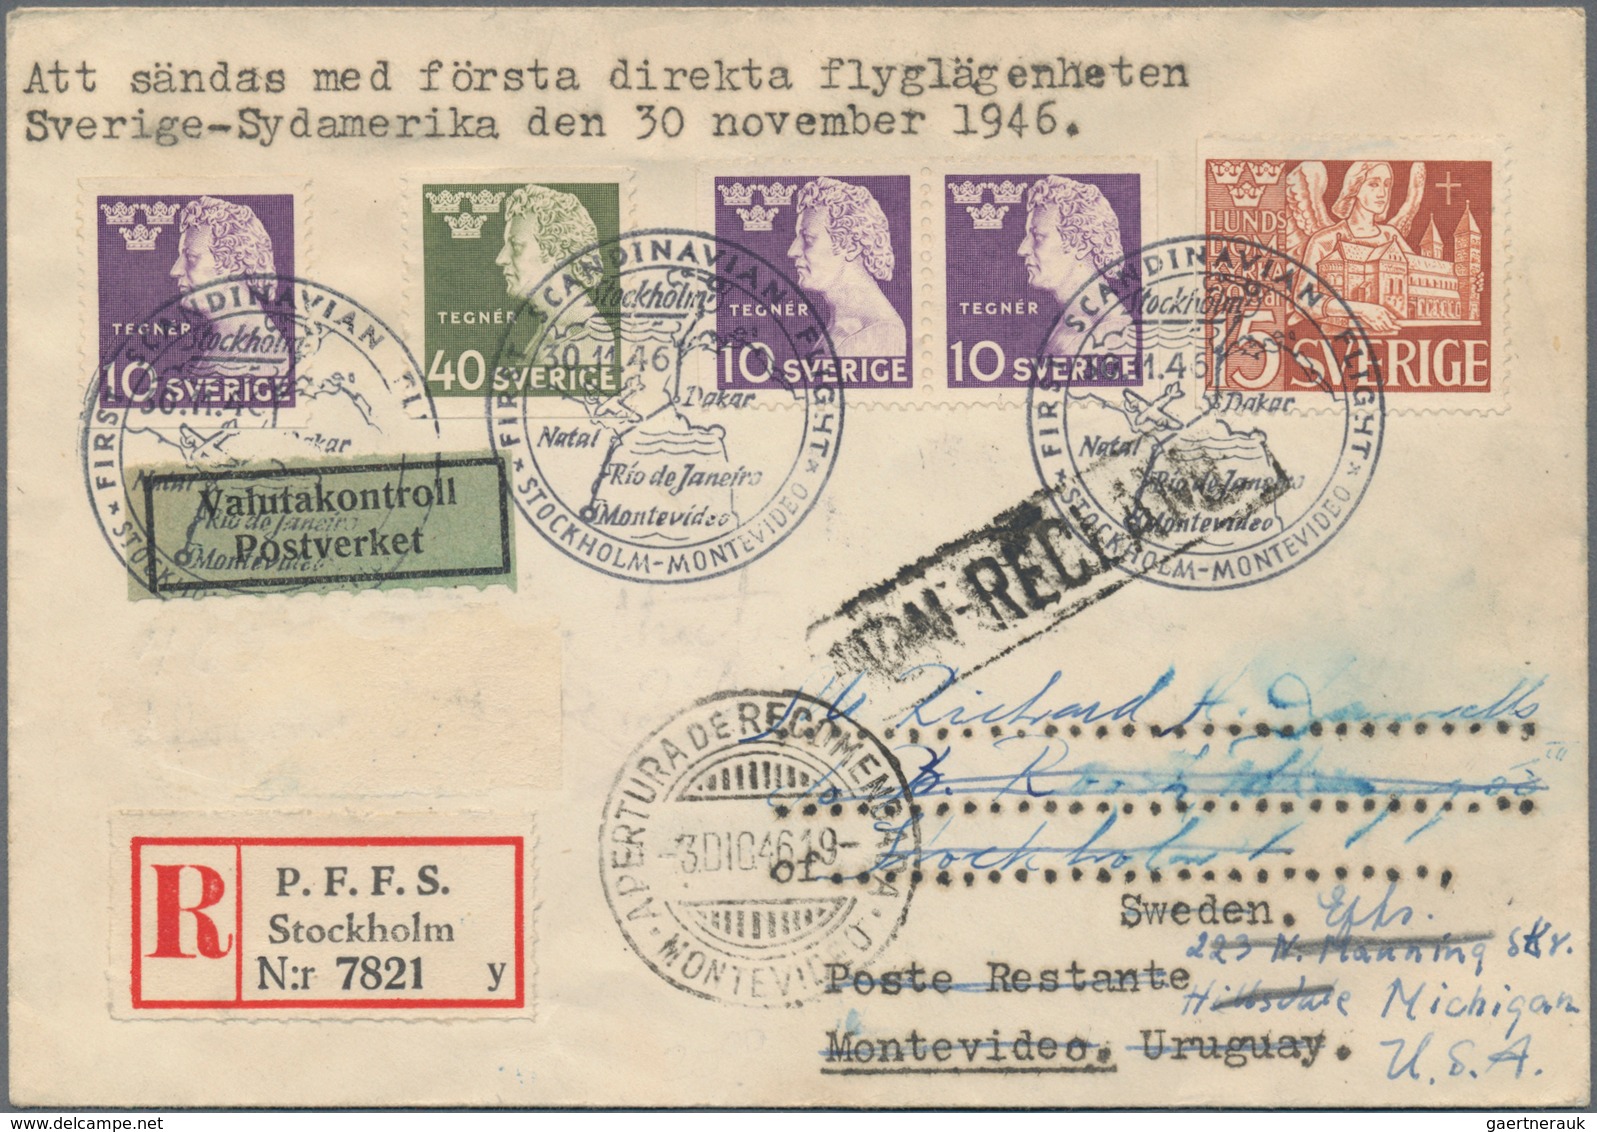 Schweden: 1860/1950 (ca.), holding of several hundred covers/cards incl. registered and airmail, sta